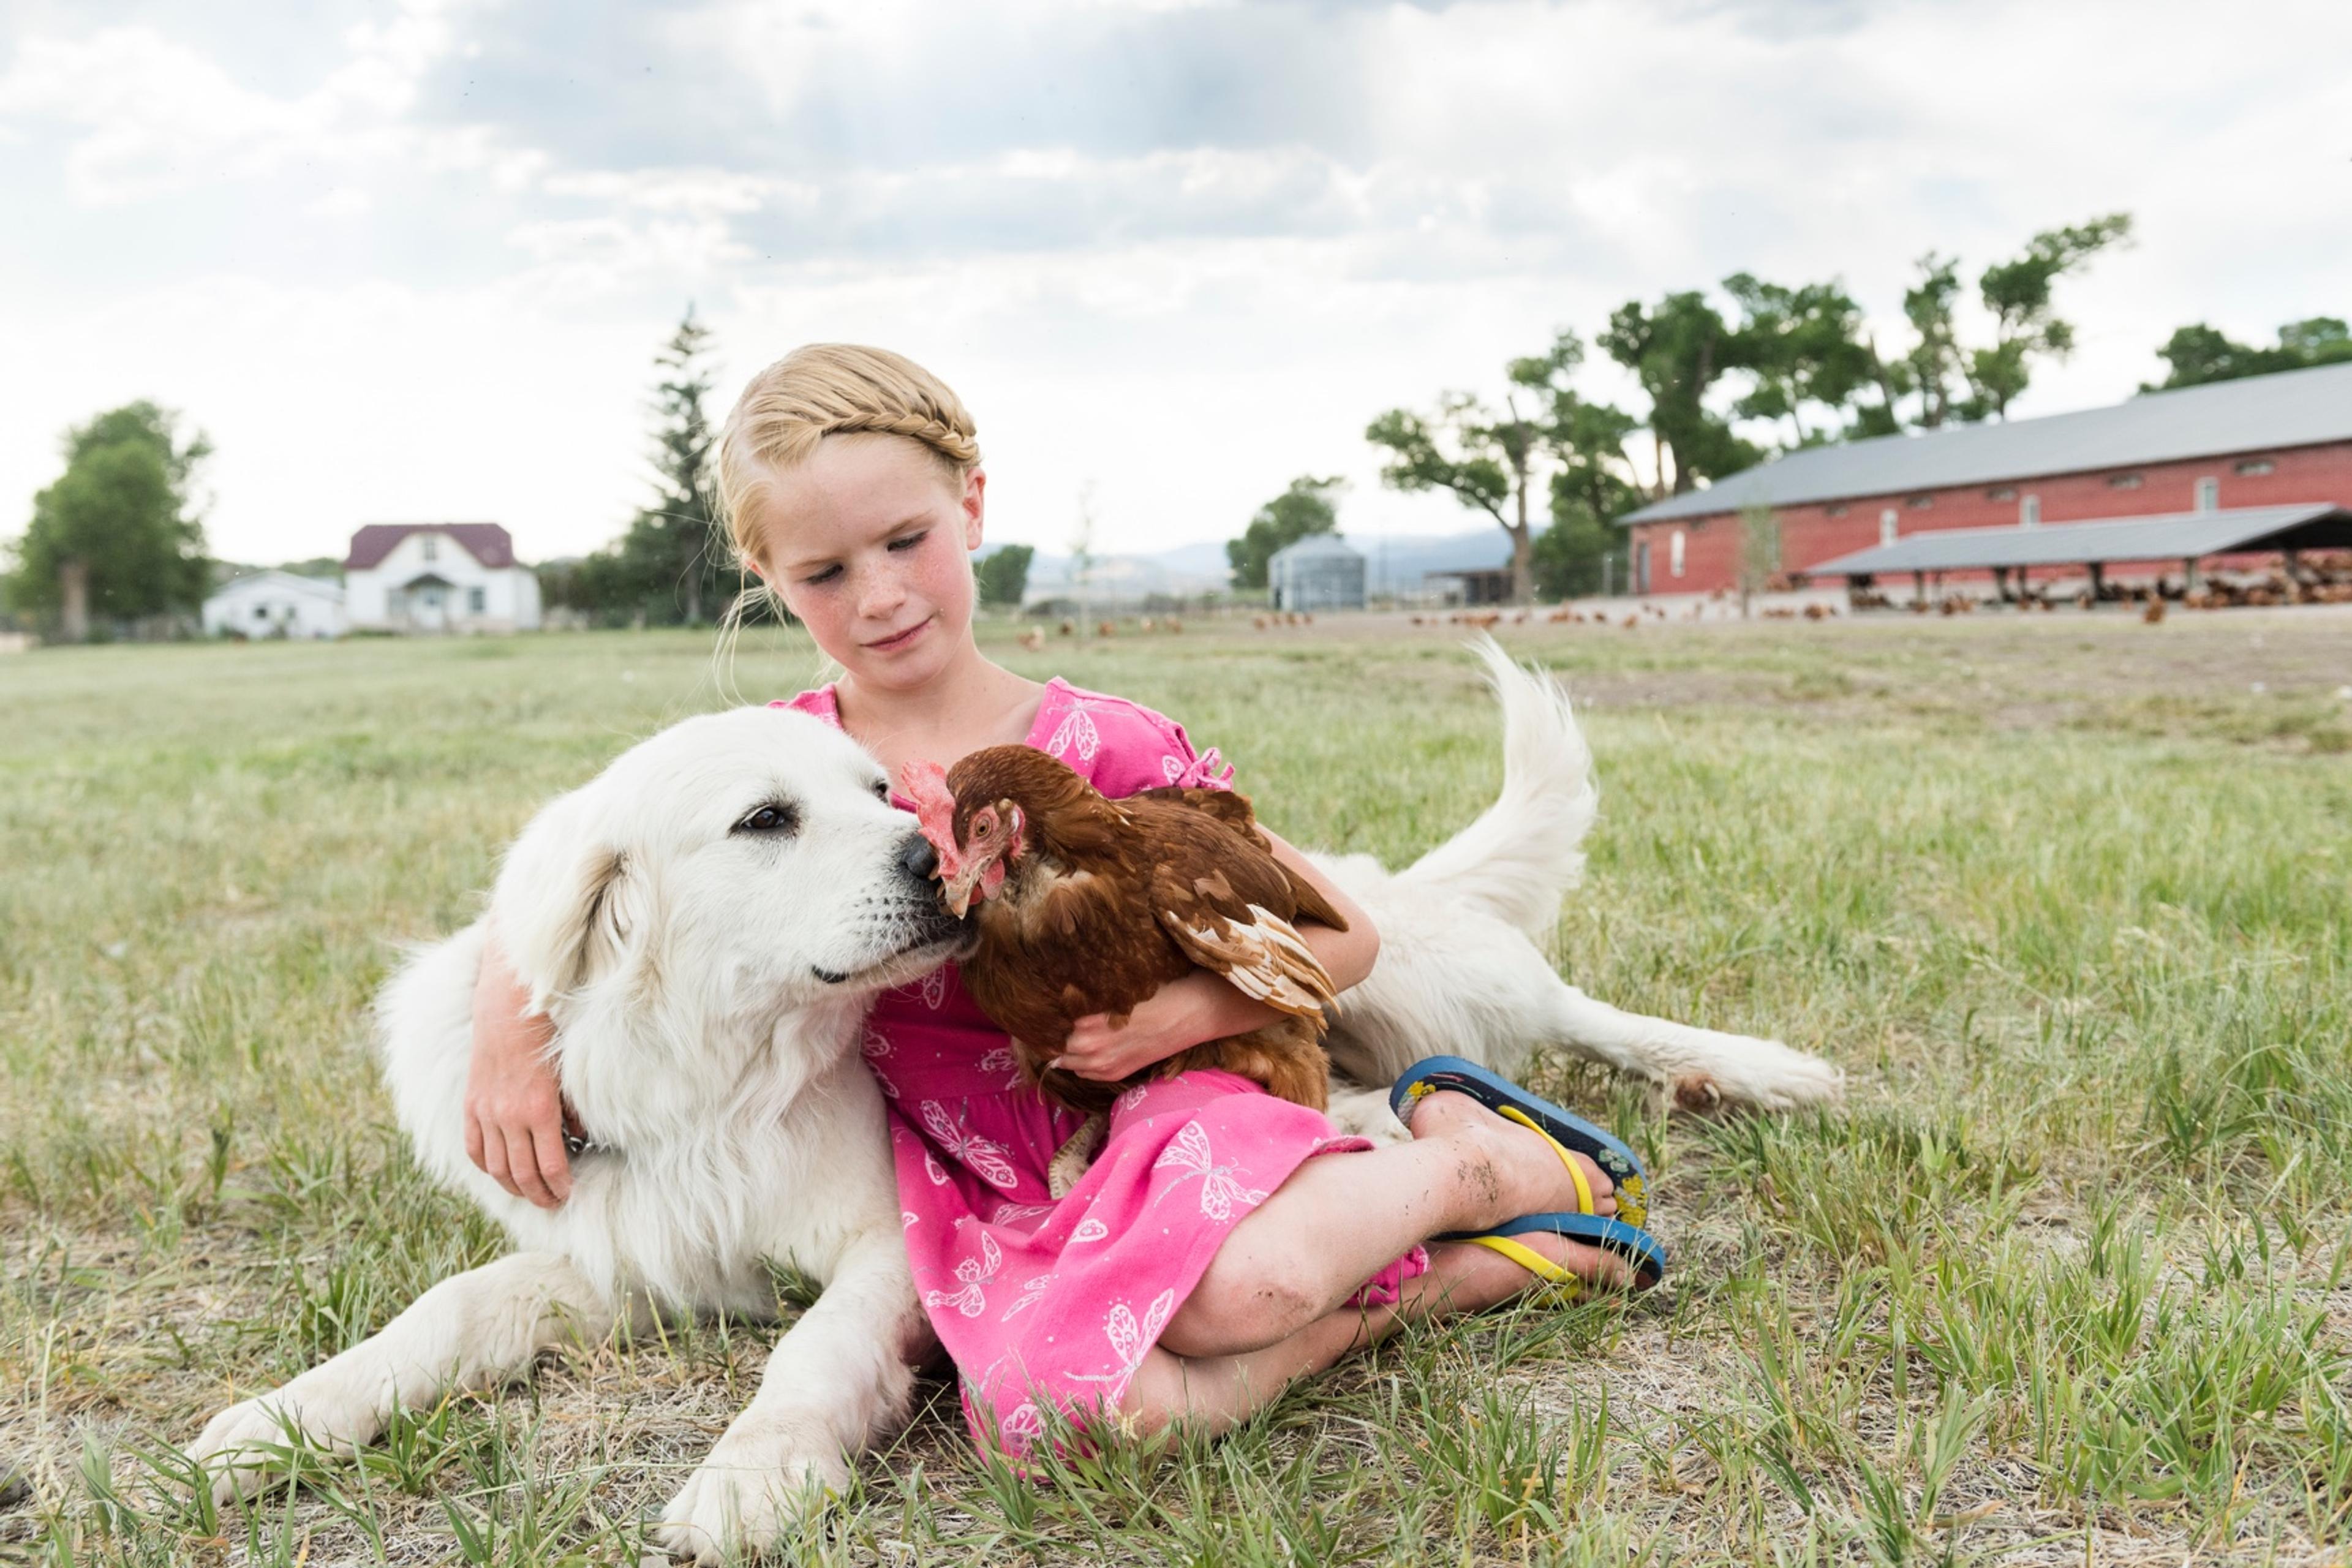 A large white dog sniffs a brown chicken being held by a girl in a pink dress.